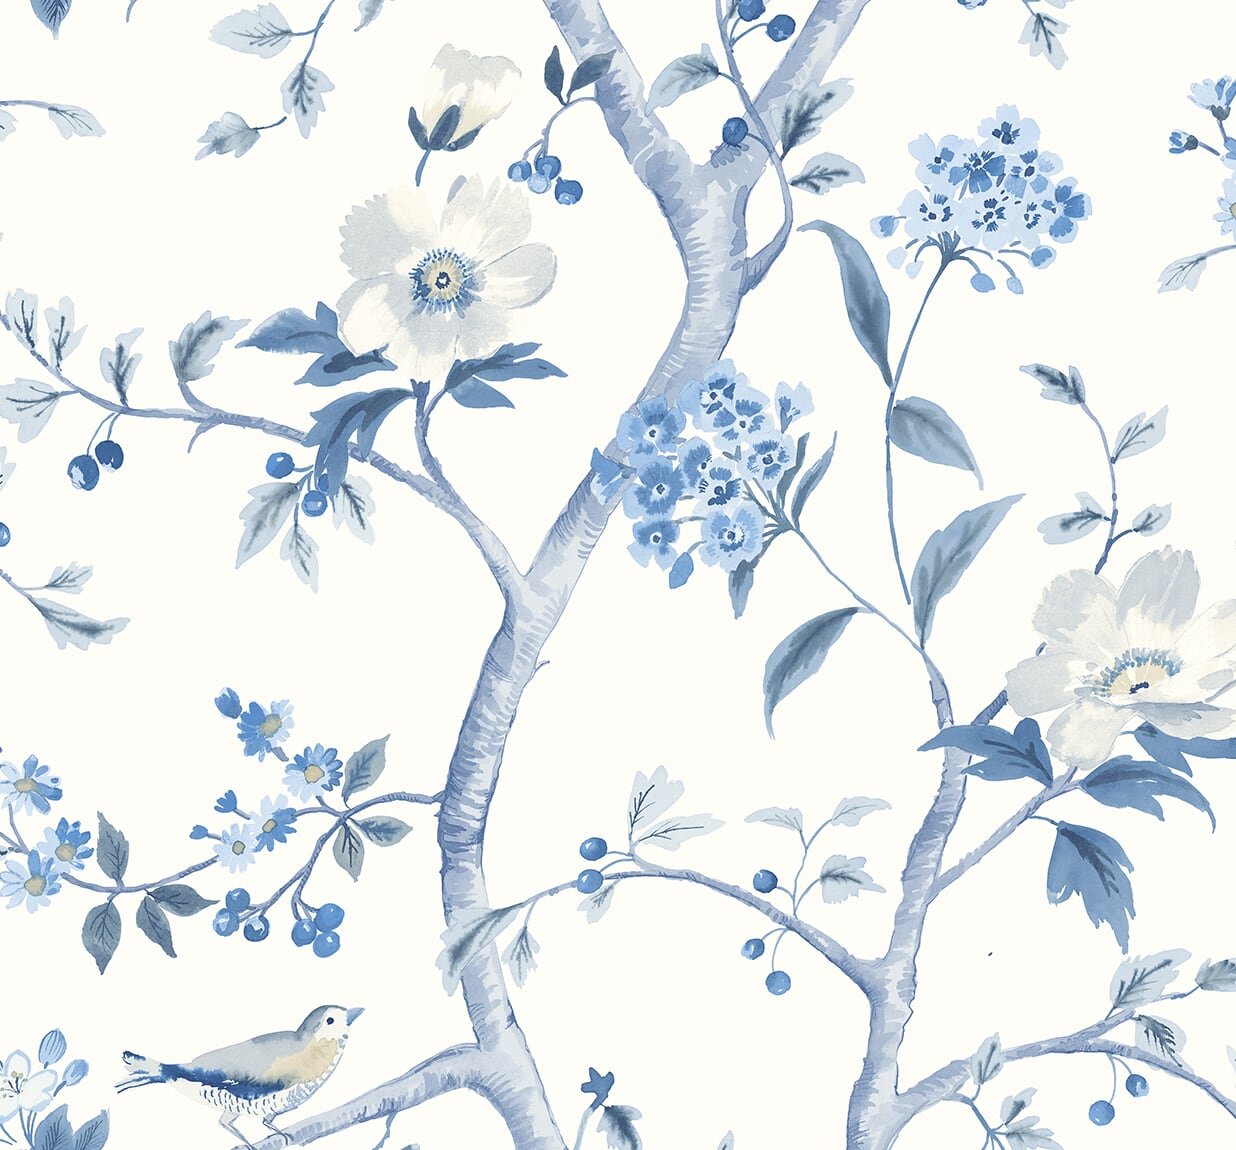 Blue White Floral Wallpaper  Wallpaper Peel and Stick  Removable Wallpaper   Peel and Stick Wallpaper  Wall Paper Peel And Stick  2178 JamesAndColors